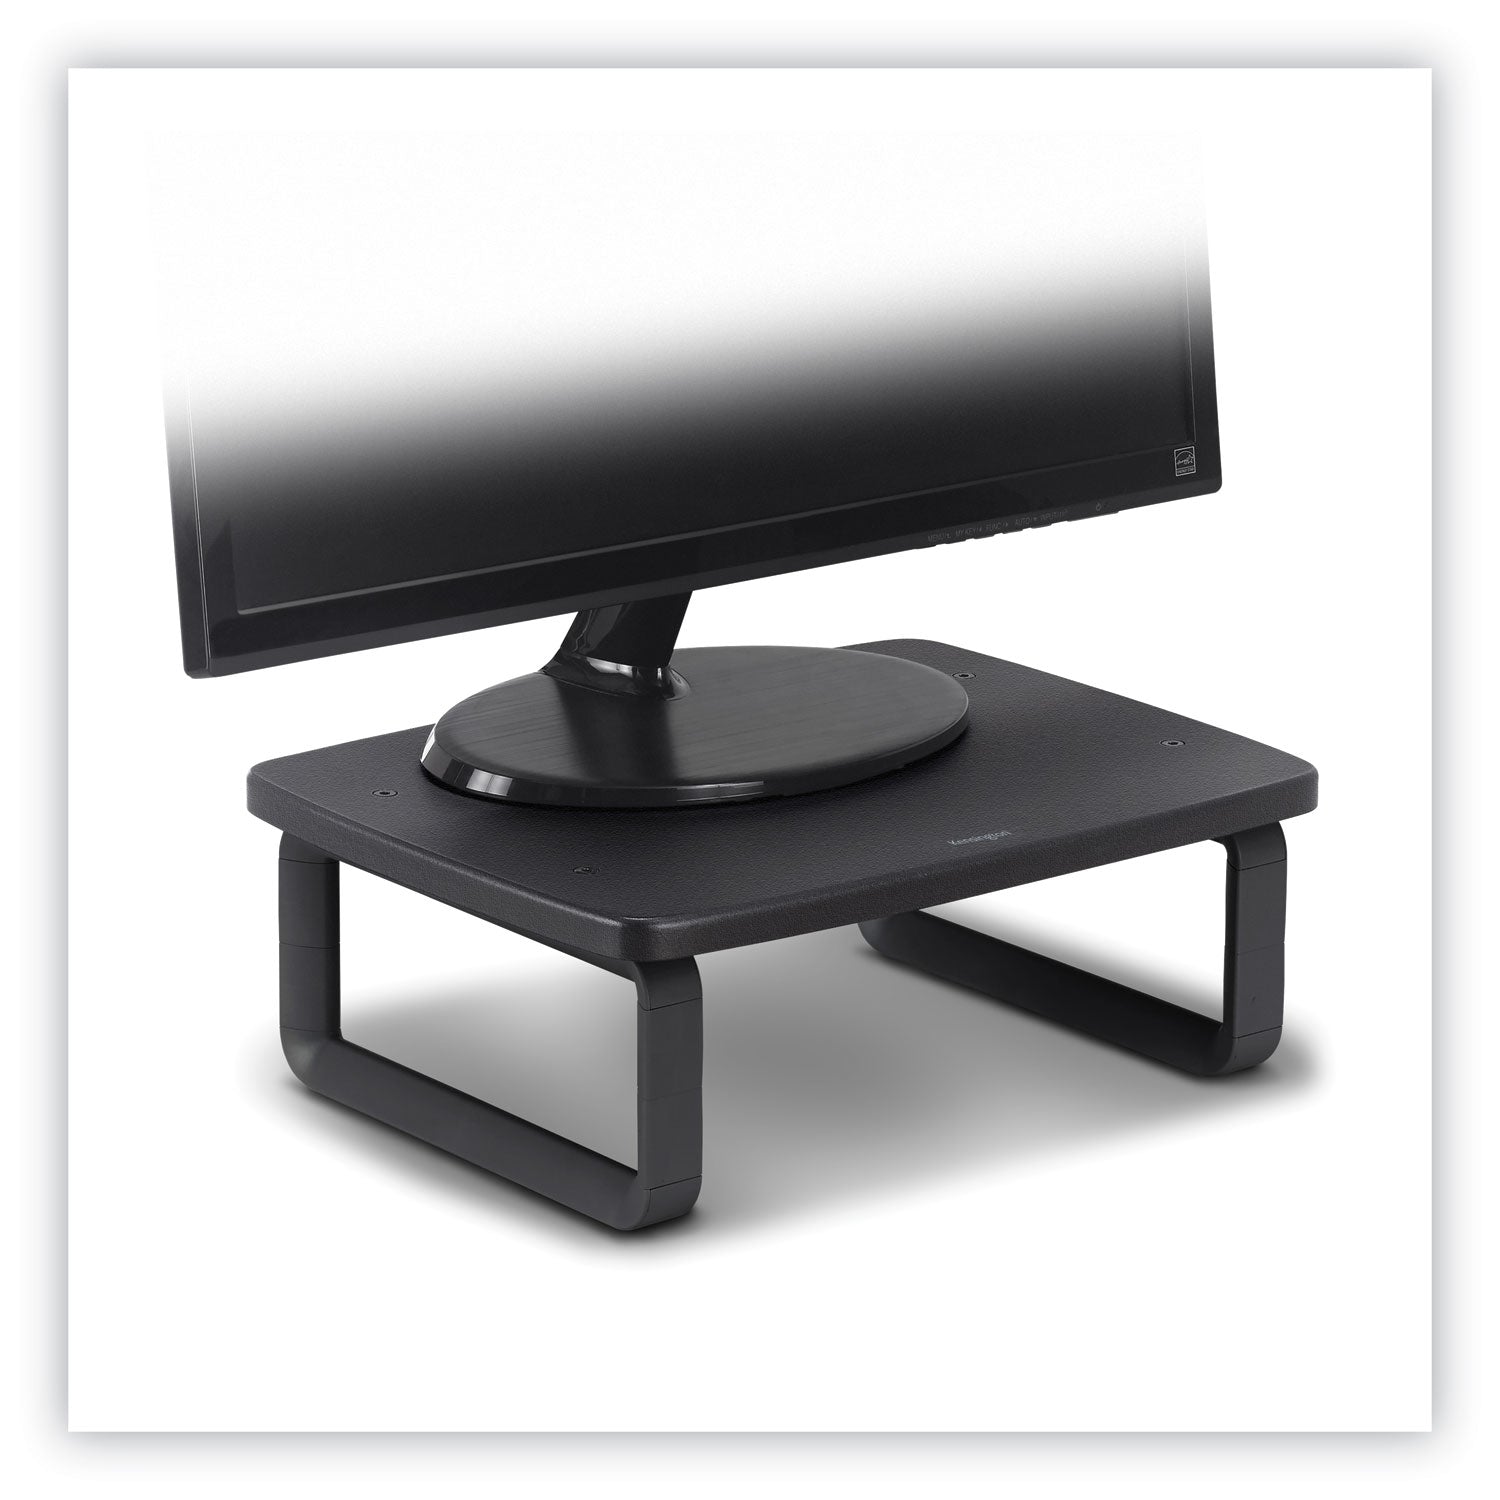 smartfit-monitor-stand-plus-162-x-22-x-3-to-6-black-supports-80-lbs_kmw52786 - 3